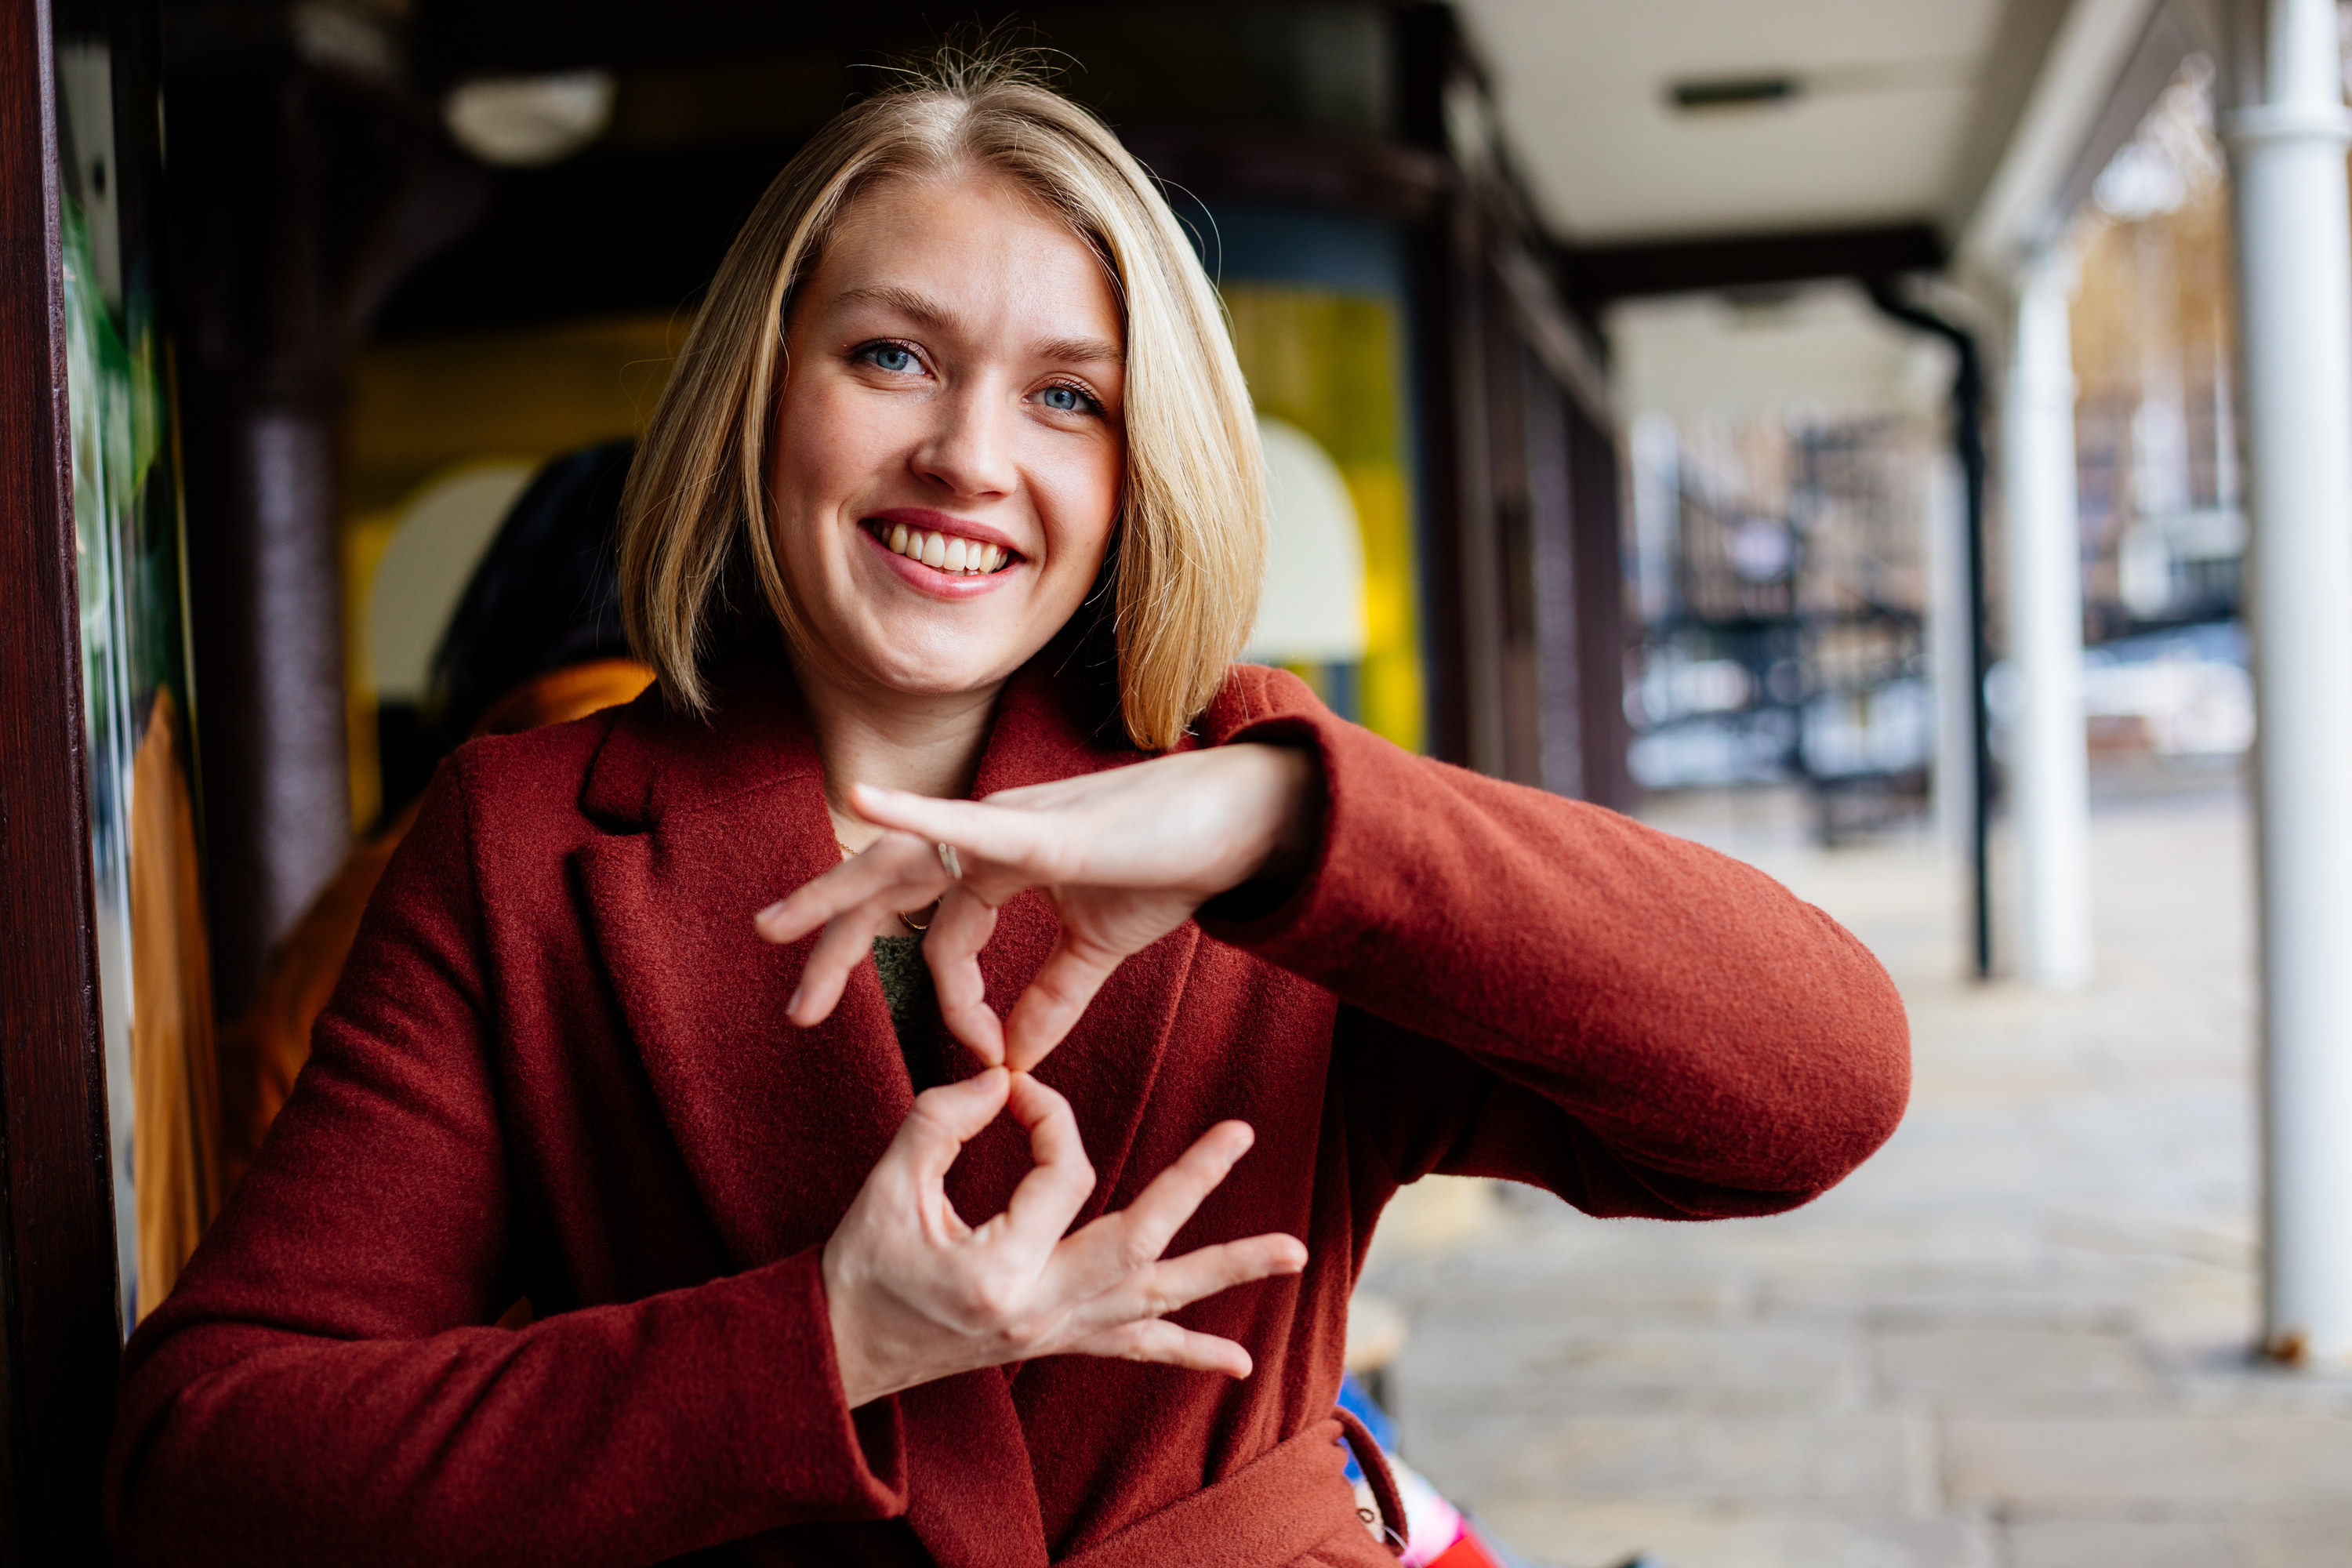 A smiling woman using sign language